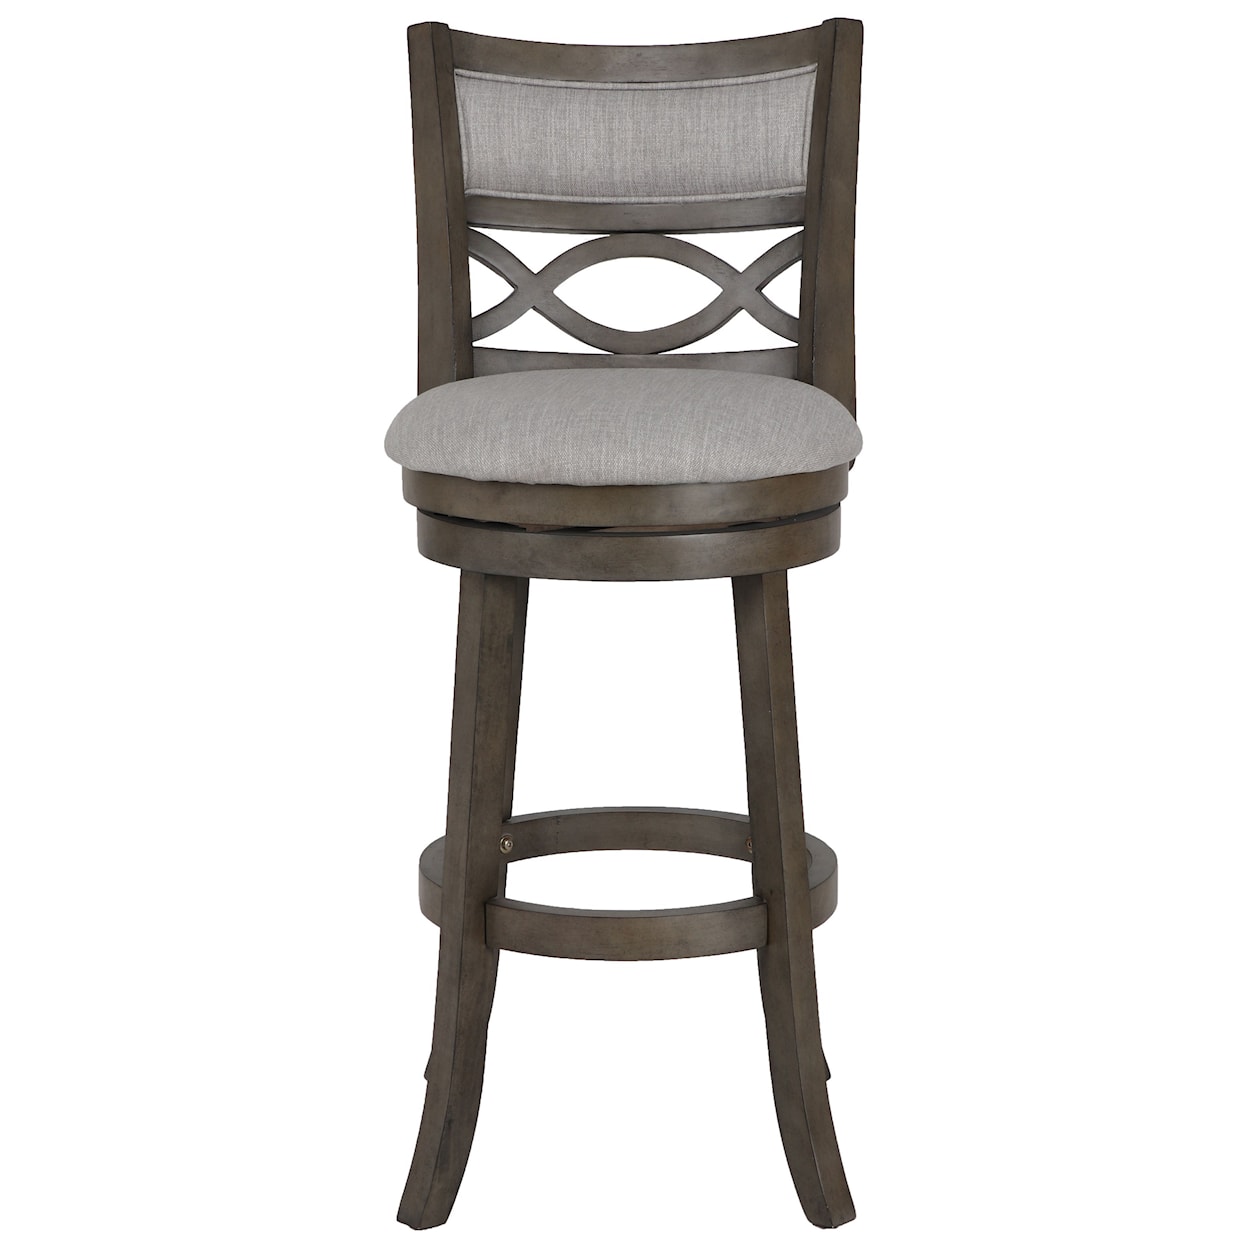 New Classic Furniture Manchester 29" Barstool with Fabric Seat